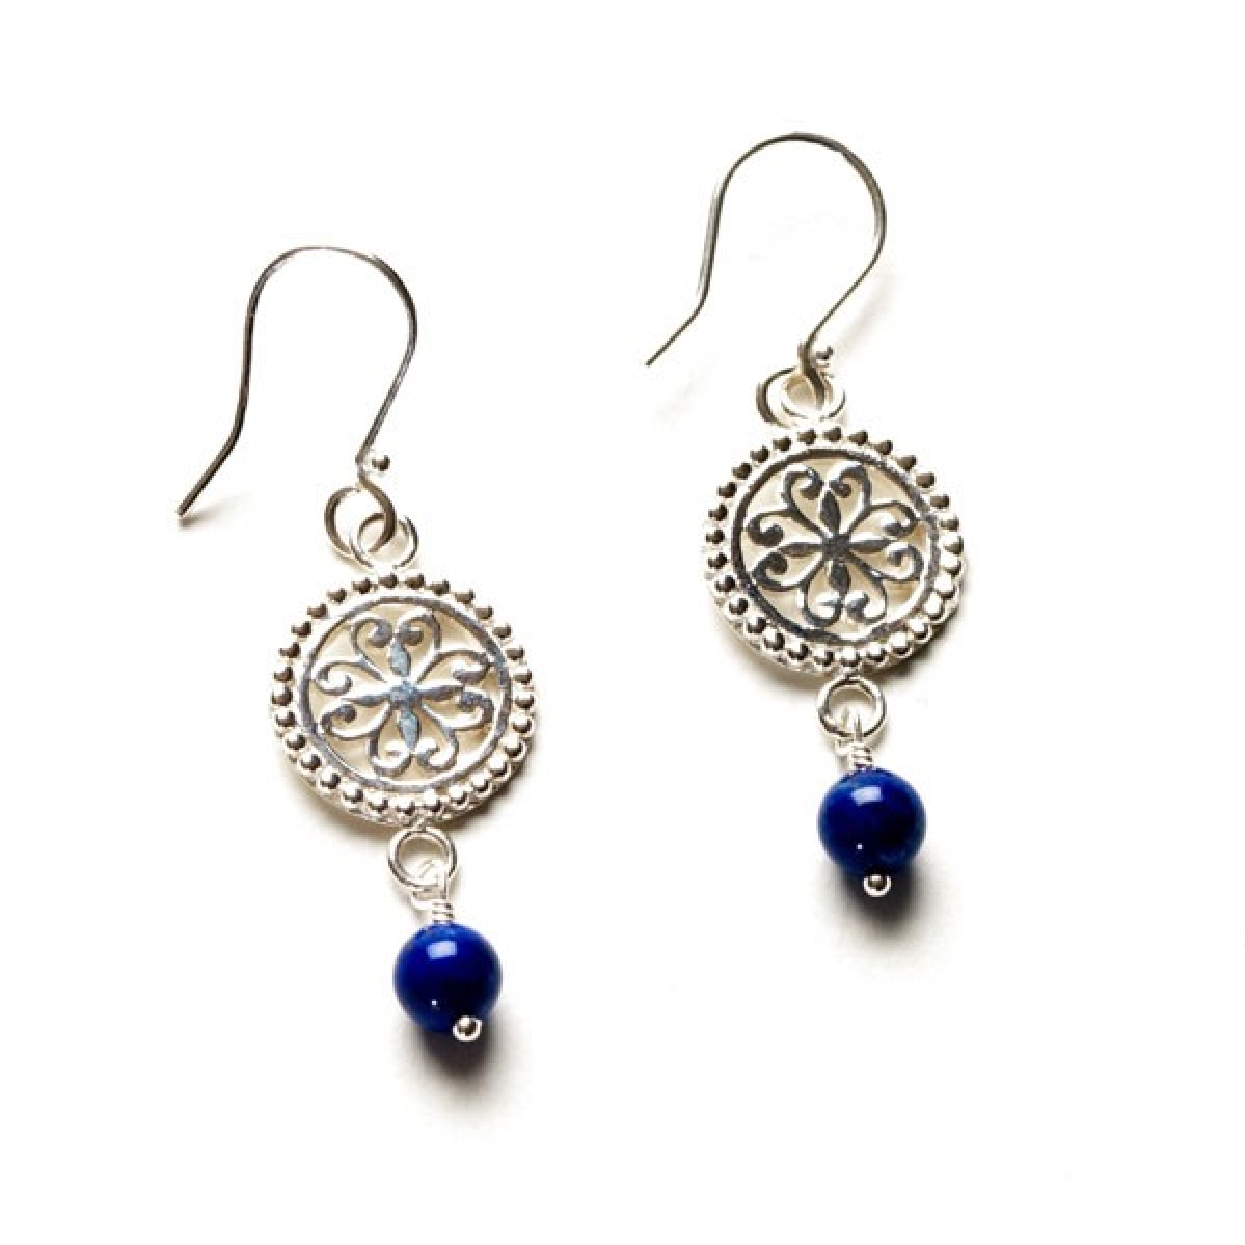 Southern Gates sterling and lapis earrings. CARE140L